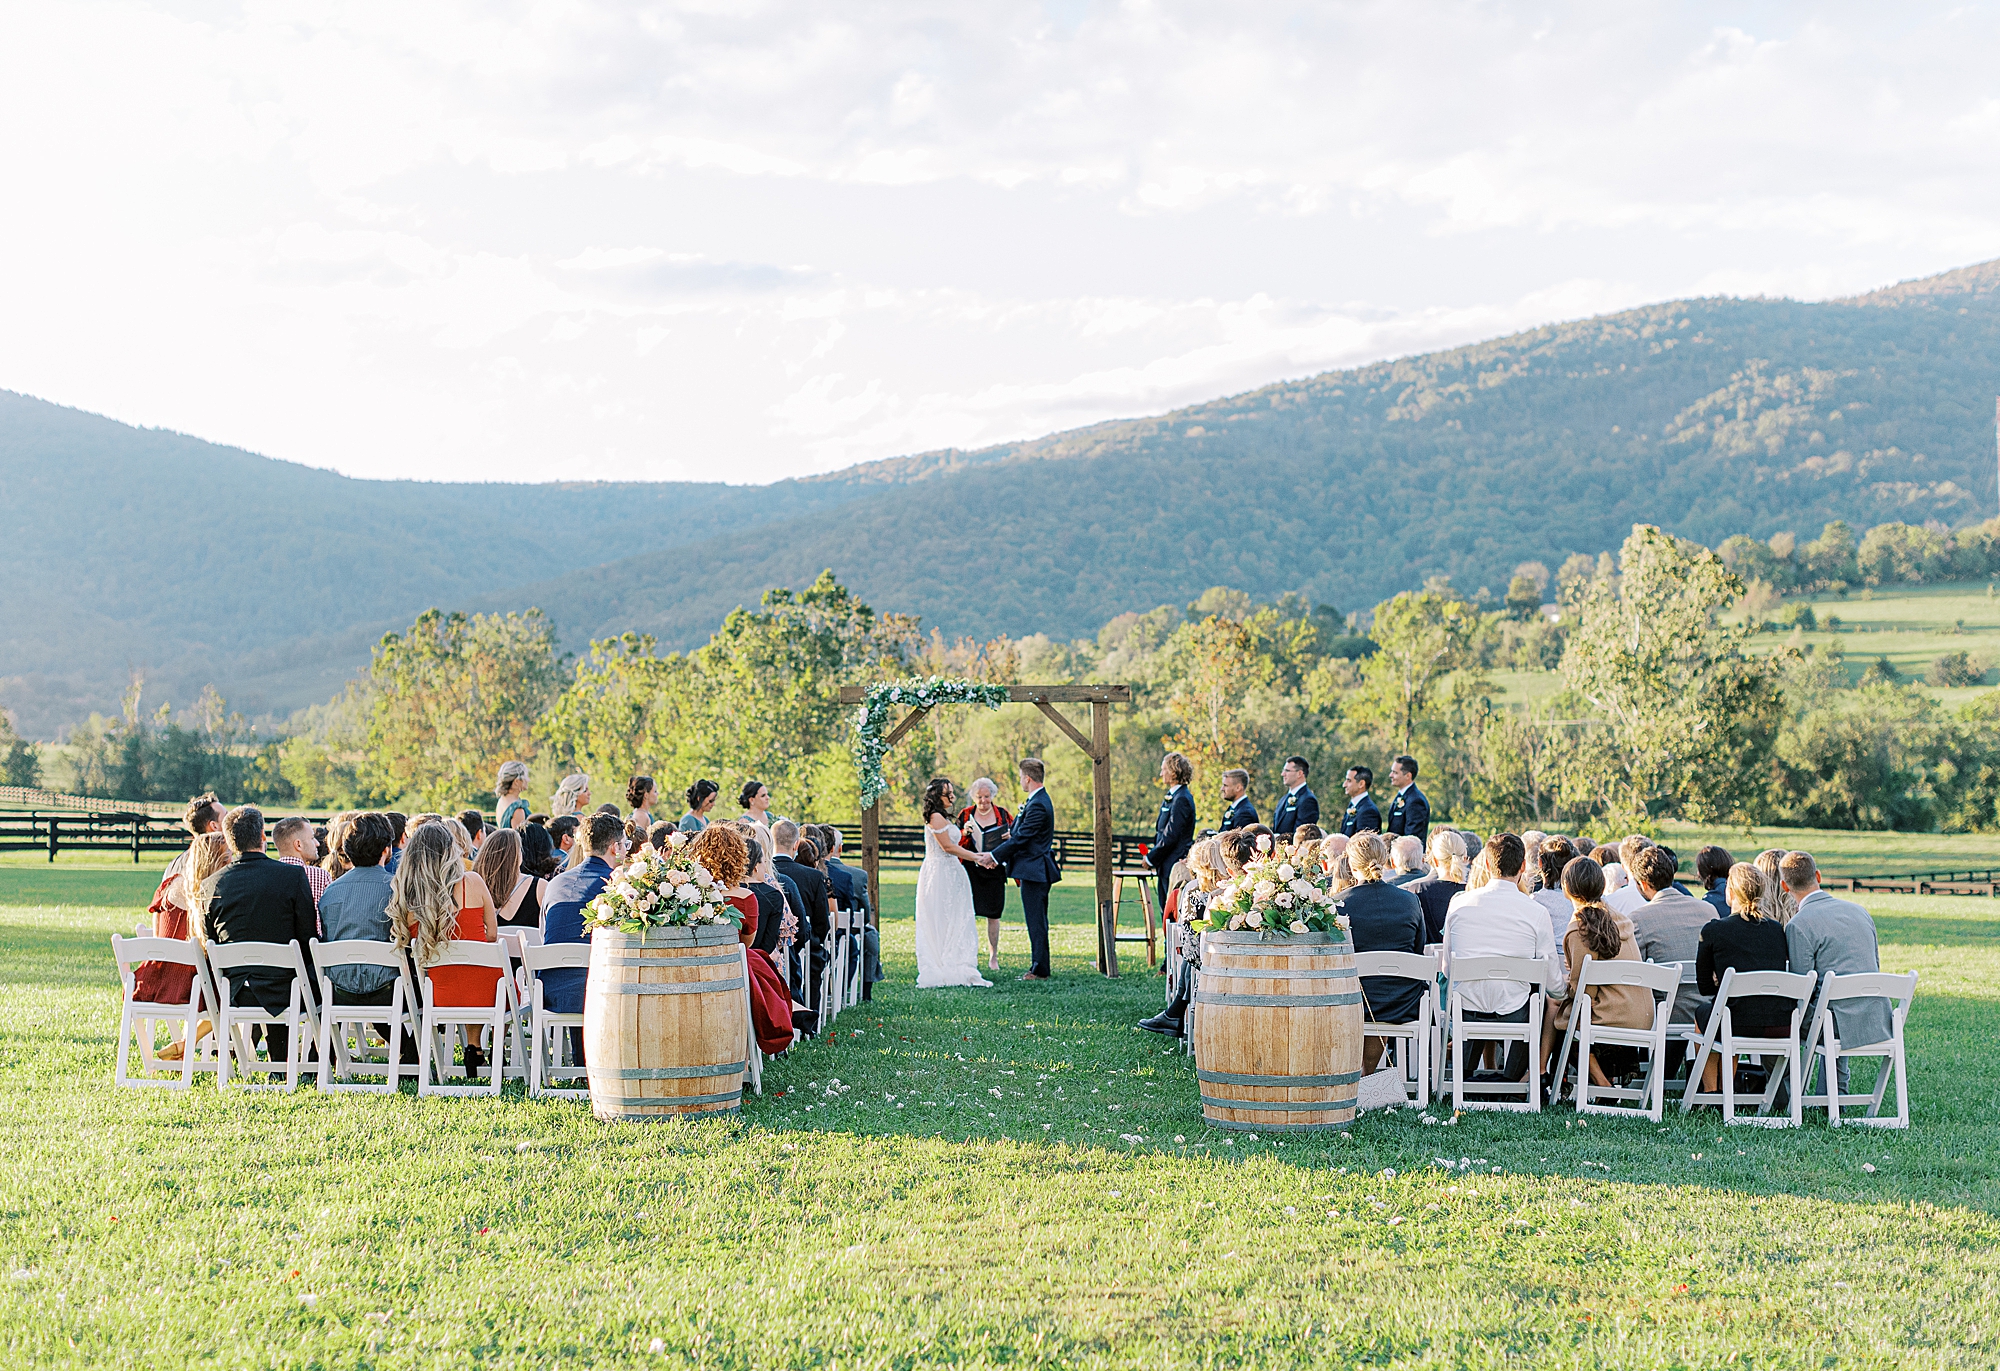 King Family Vineyards ceremony during sunset in the Fall.